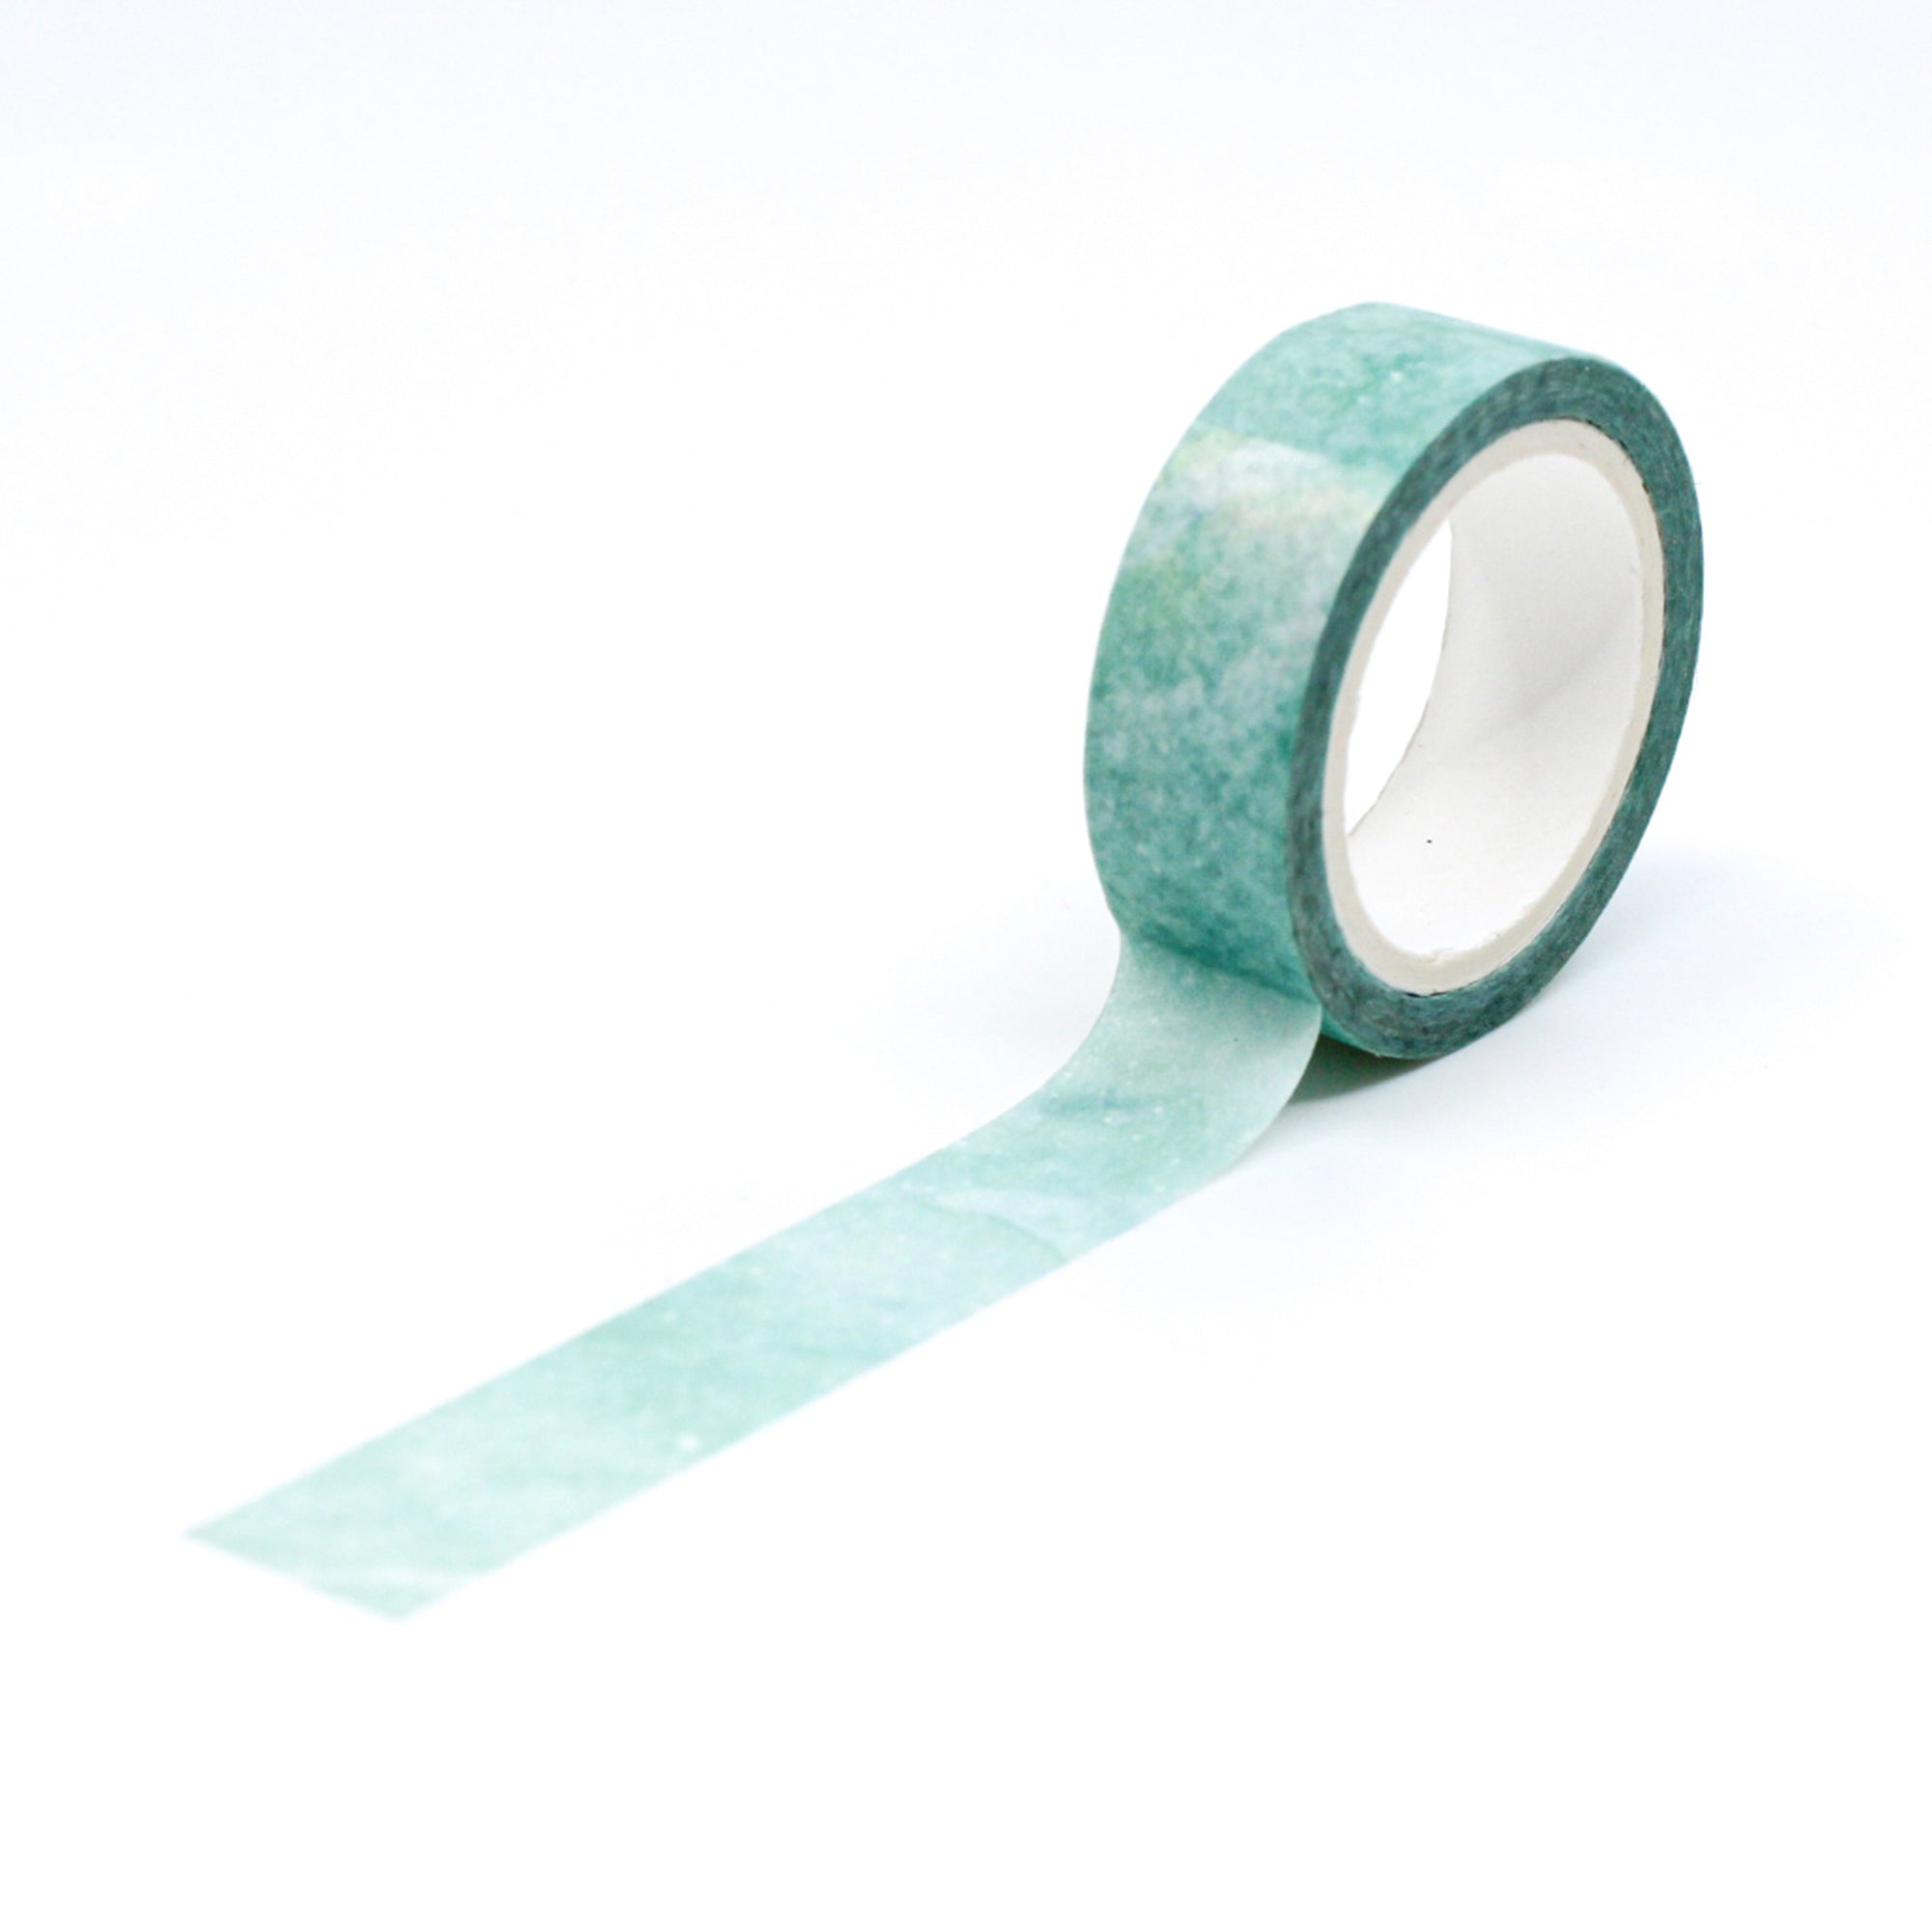 This light green sky watercolor washi tape is the perfect addition to your washi collection. The simplicity of the pattern is perfect for accenting and matching any project's theme while adding a beautiful and interesting pattern. This tape is sold at BBB Supplies Craft Shop.